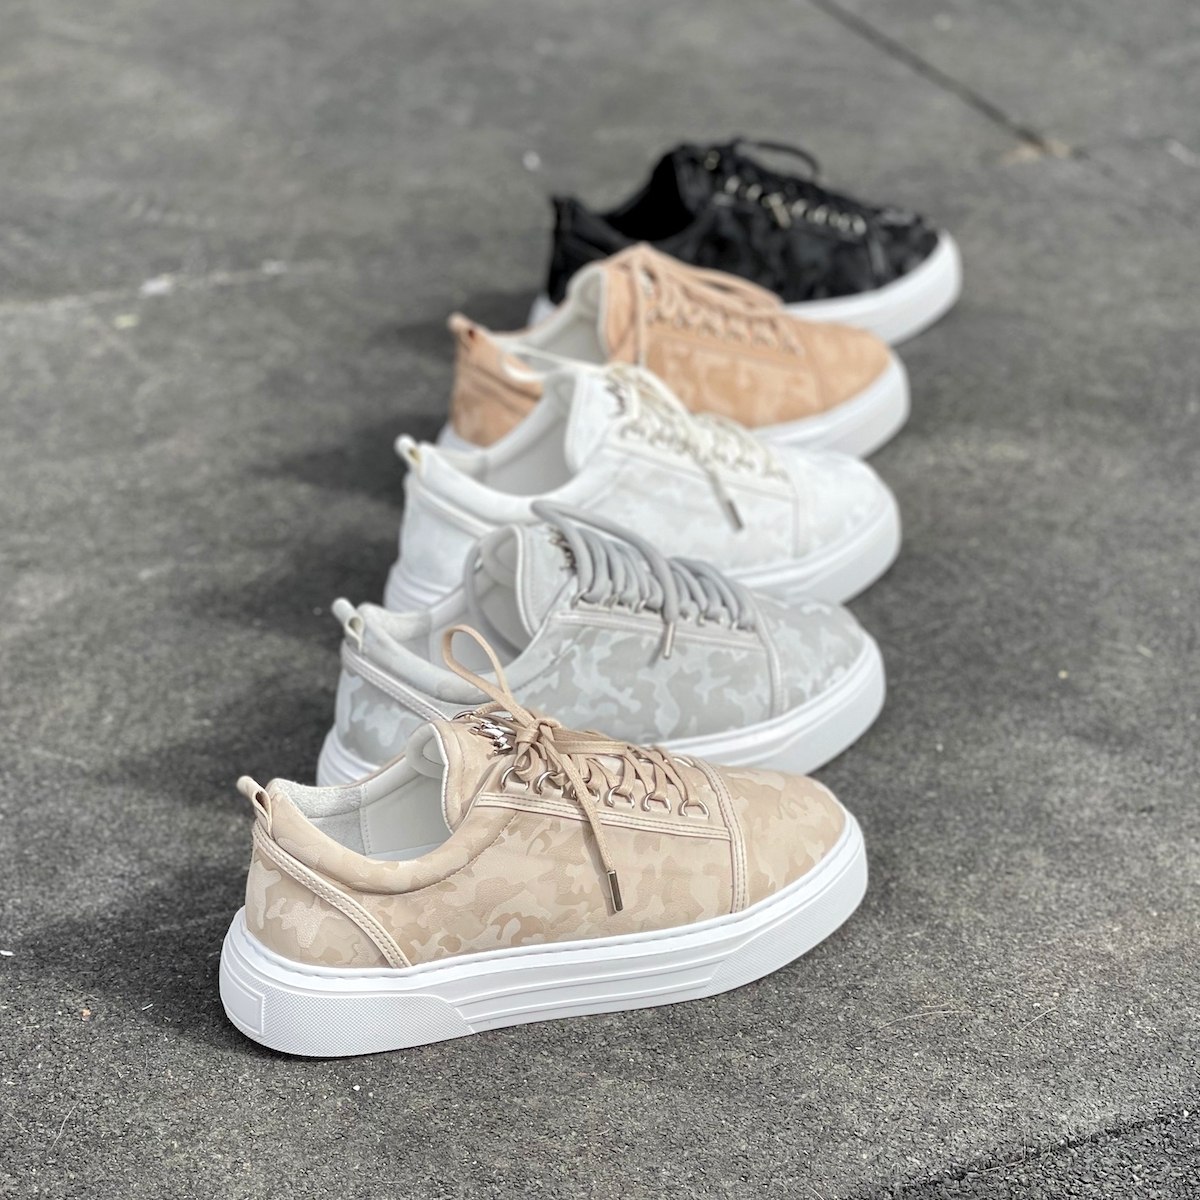 Baskets Basses pour Homme Sneakers Couronnées Camouflage Taupe | Martin Valen